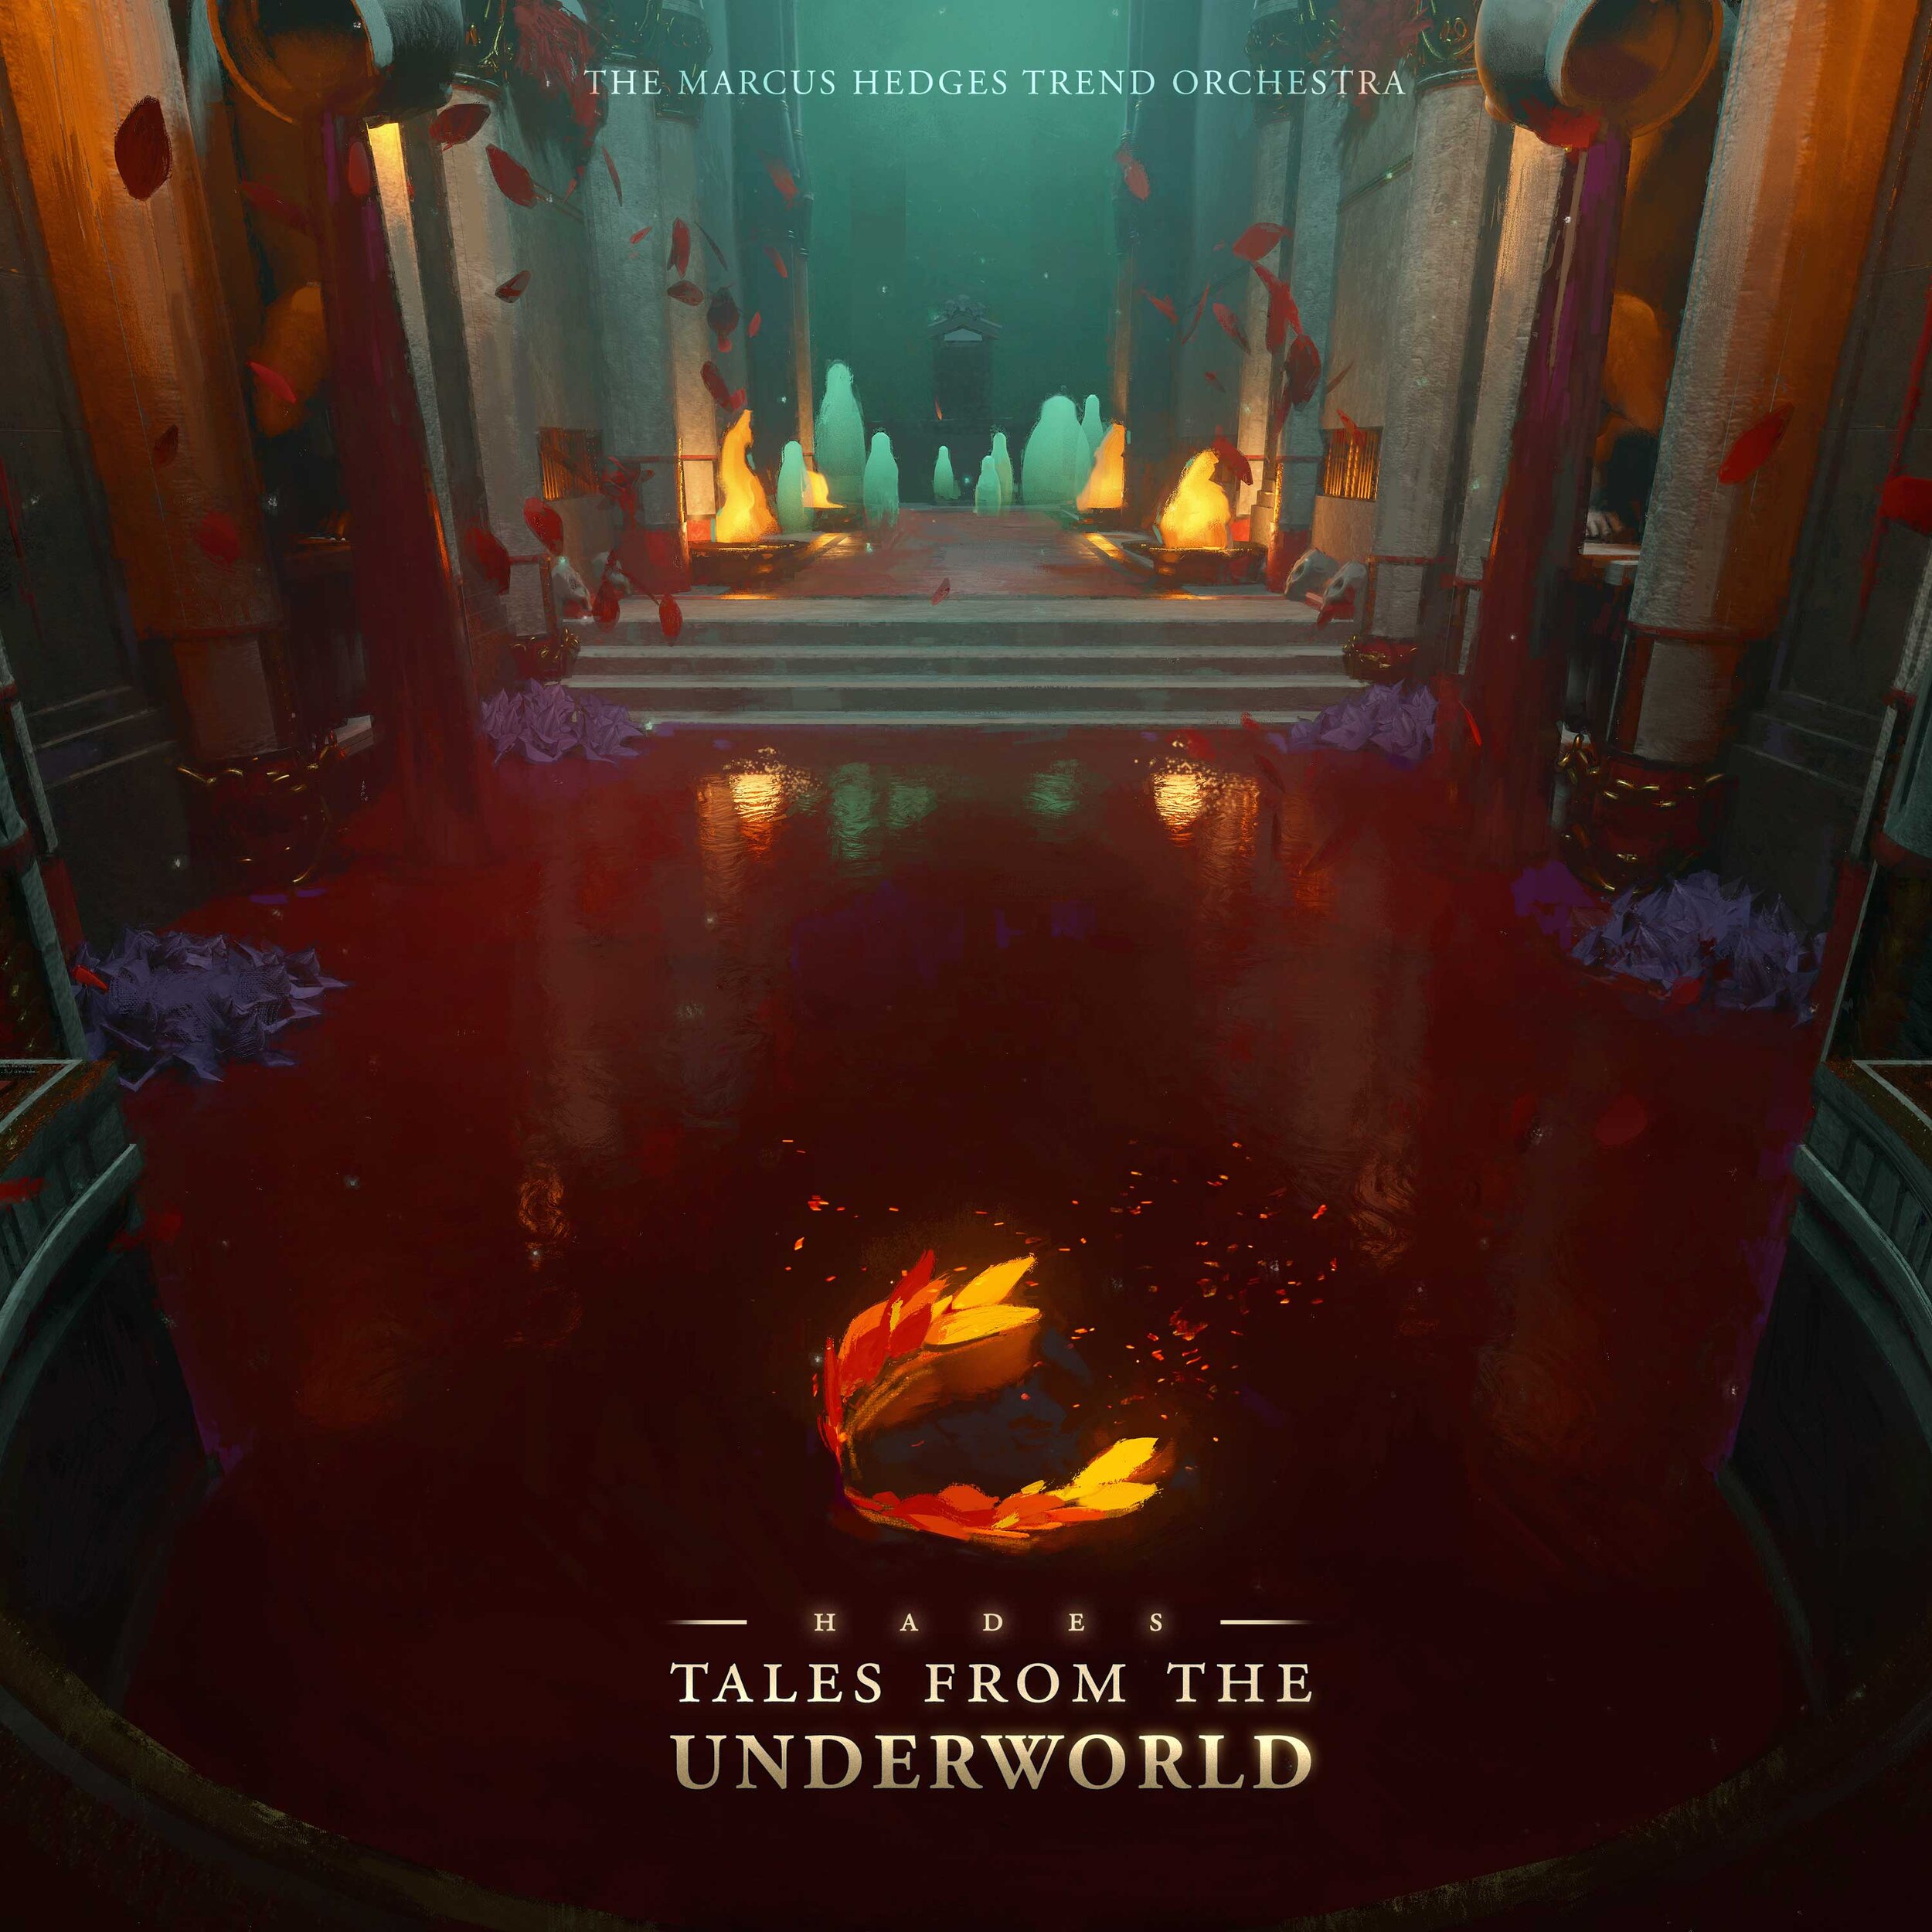 Compr_3000x3000_Hades-Tales-From-The-Underworld_The-Marcus-Hedges-Trednd-Orchestra.png